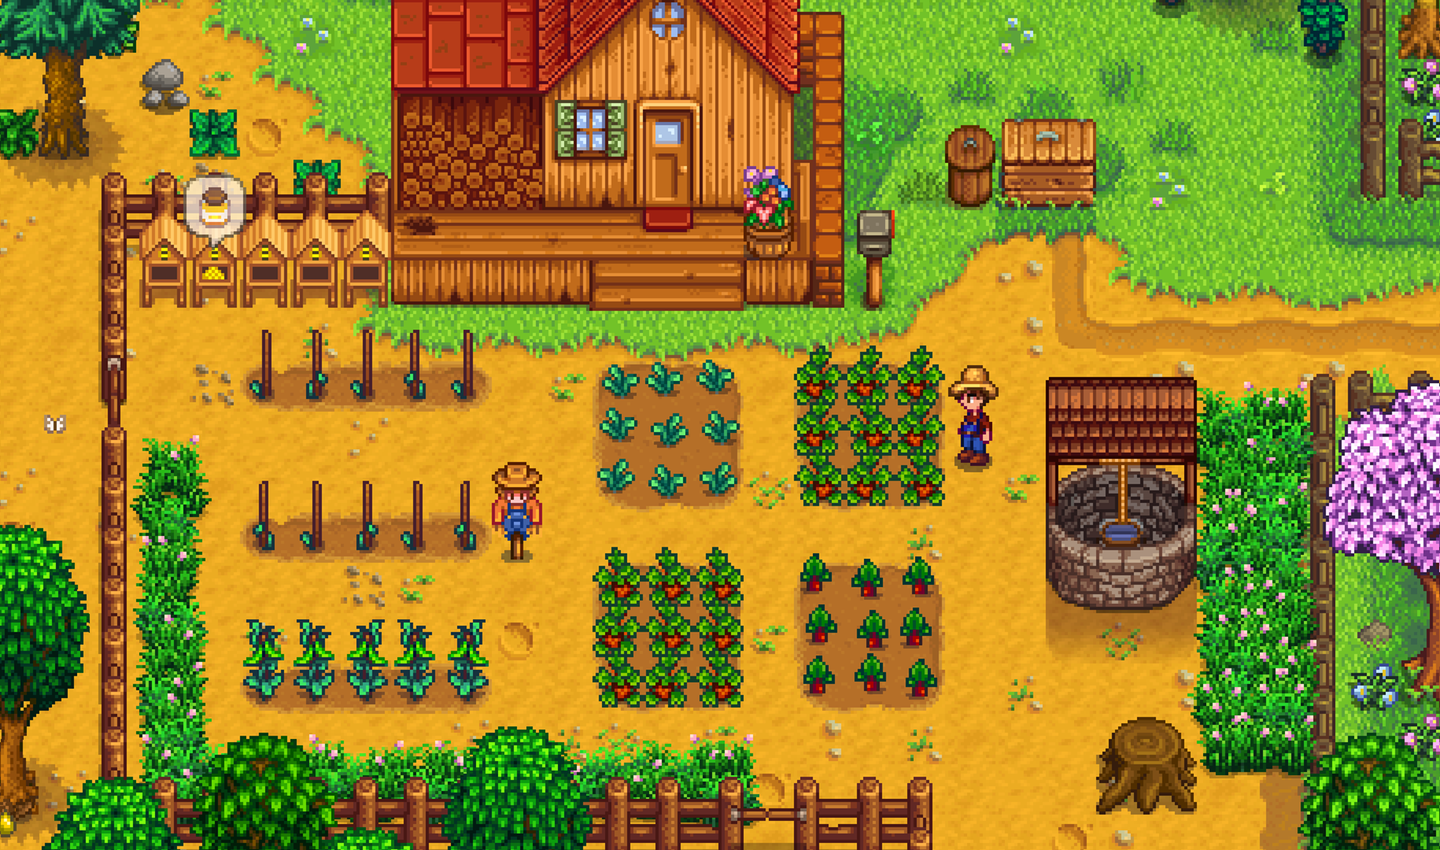 In the game Stardew Valley, you get to raise crops, tend to animals, and forage for mushrooms. 